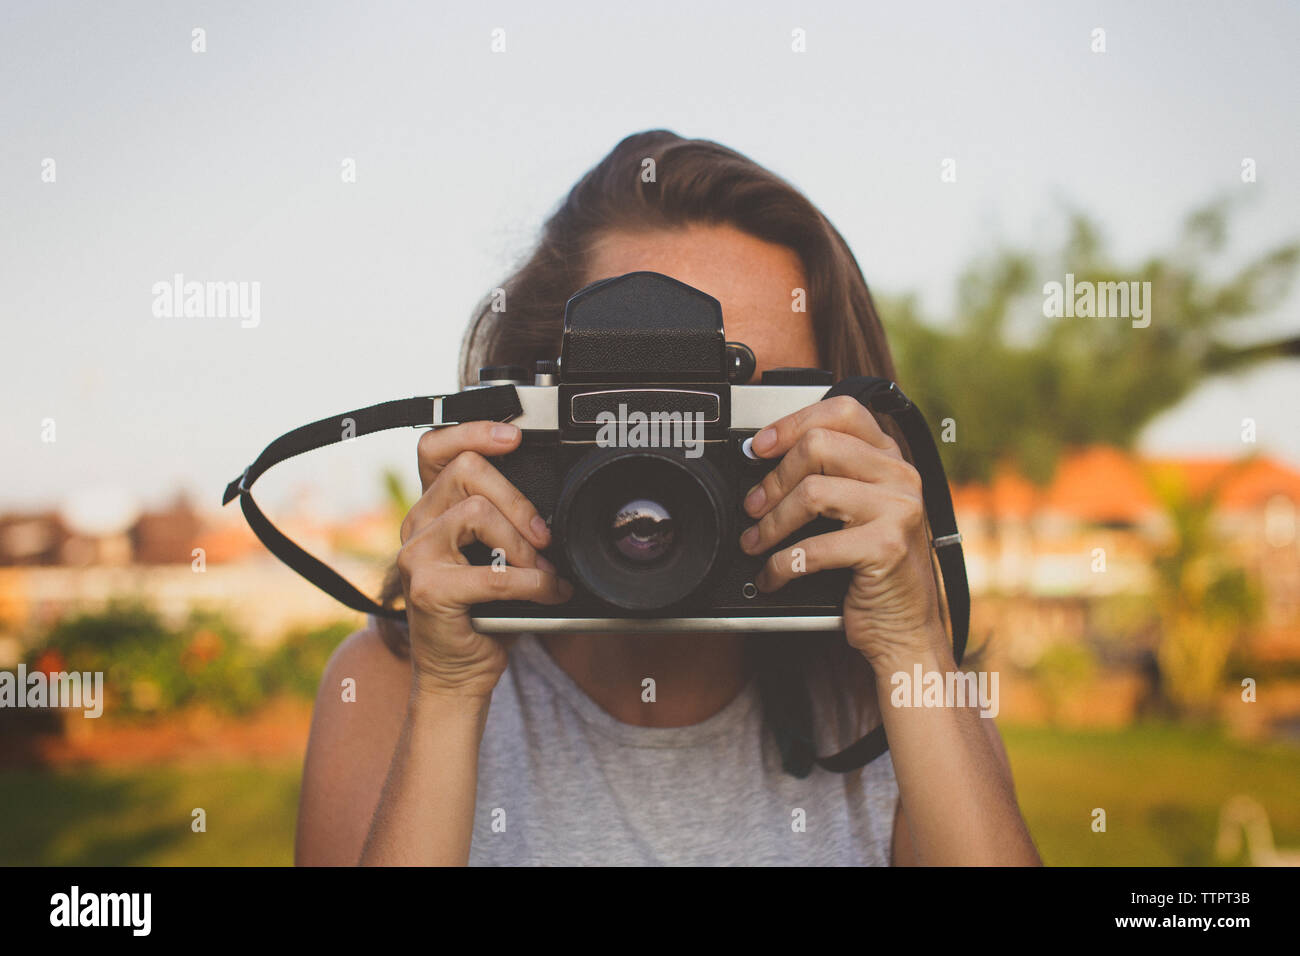 Woman photographing through old-fashioned camera Stock Photo